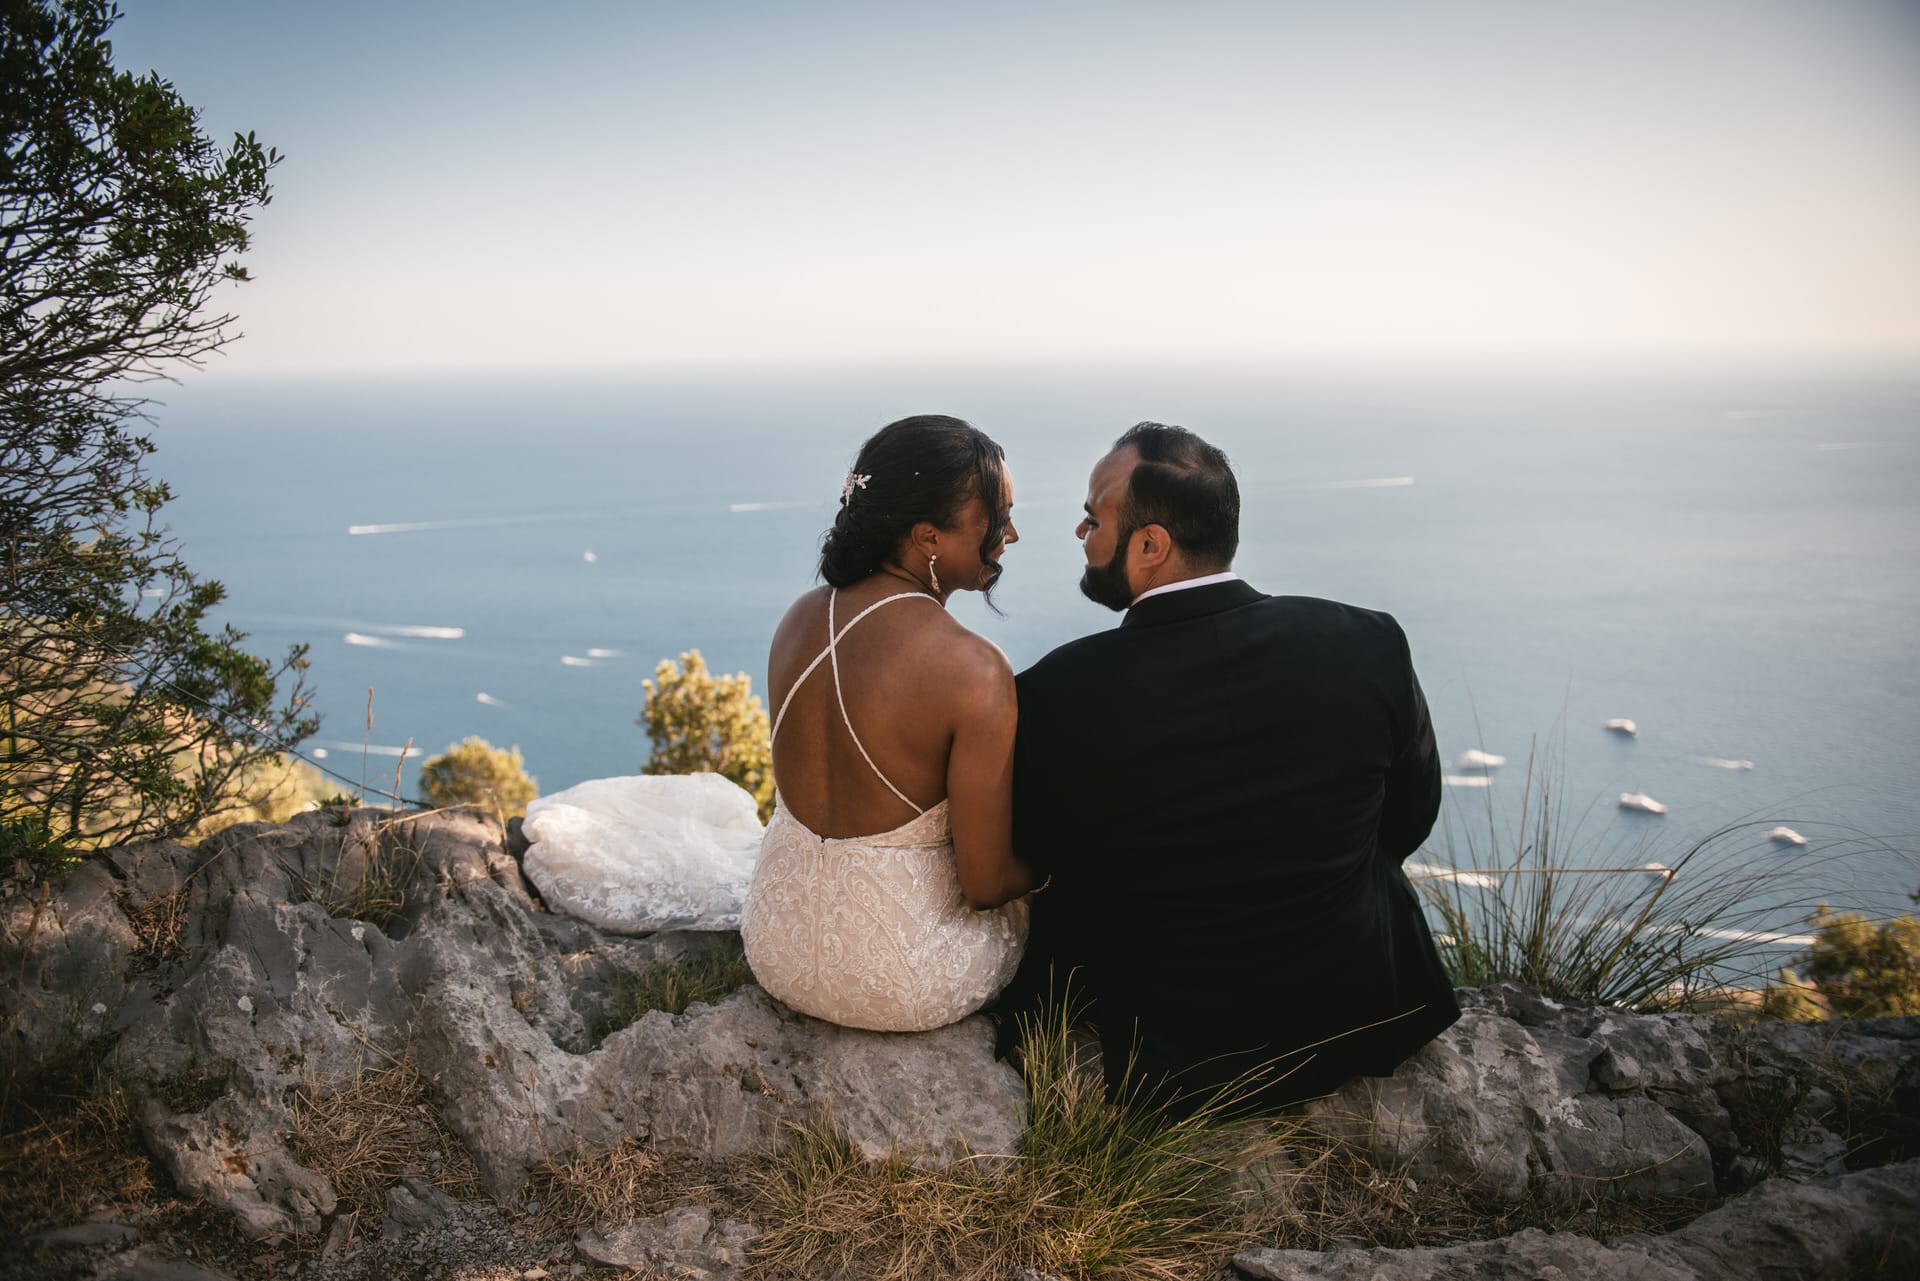 Couple posing during their elopement day on the Amalfi Coast